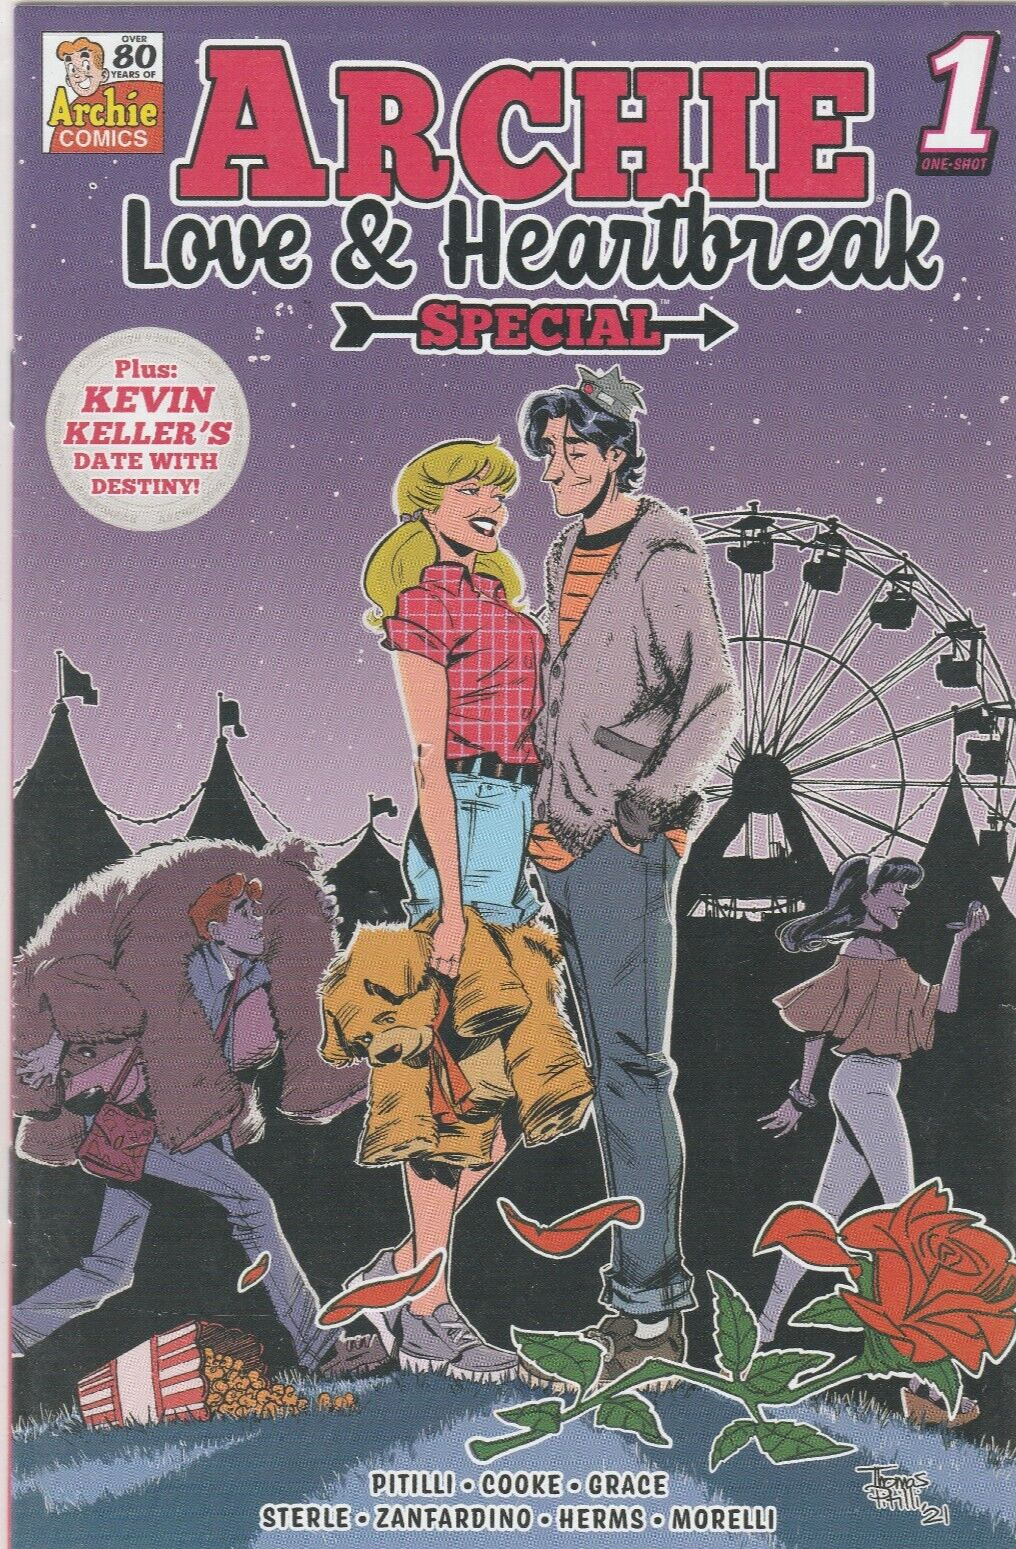 Archie Love & Heartbreak Special # 1 Cover A